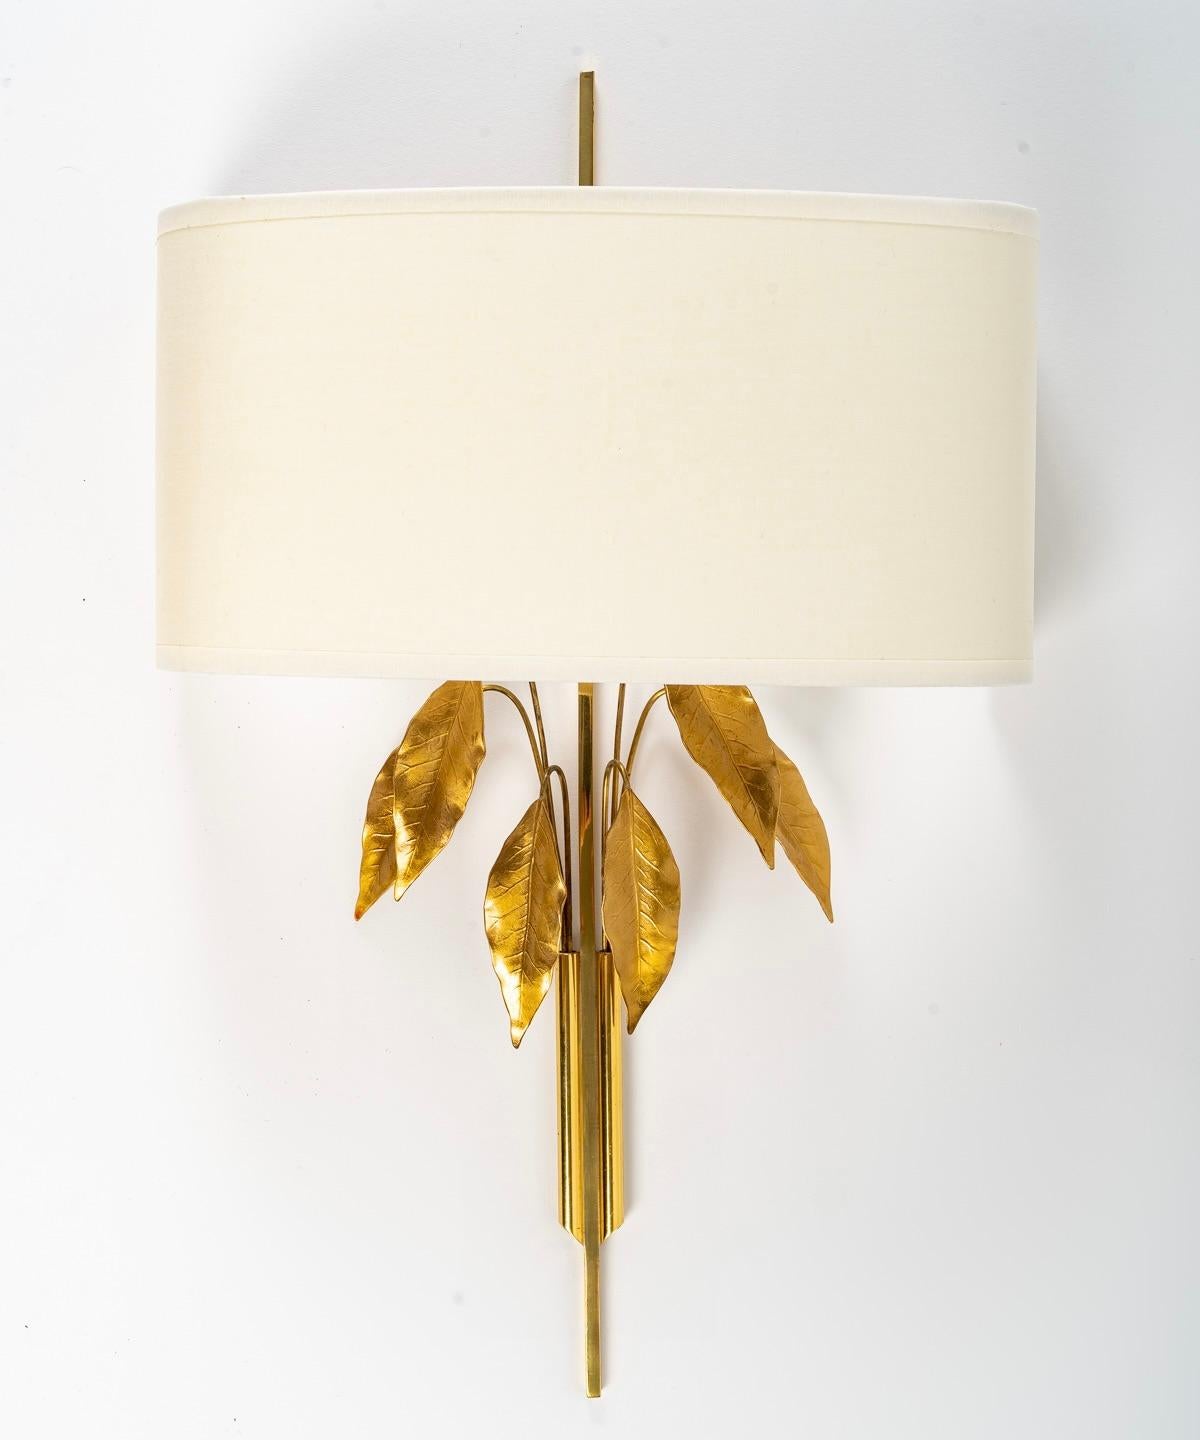 Composed of a long square section stem in gilded brass decorated with two small tubes on either side of the stem in which are placed fine stems of gilded brass foliage.
On the upper part, the wall lamp is dressed with a shade in off-white cotton